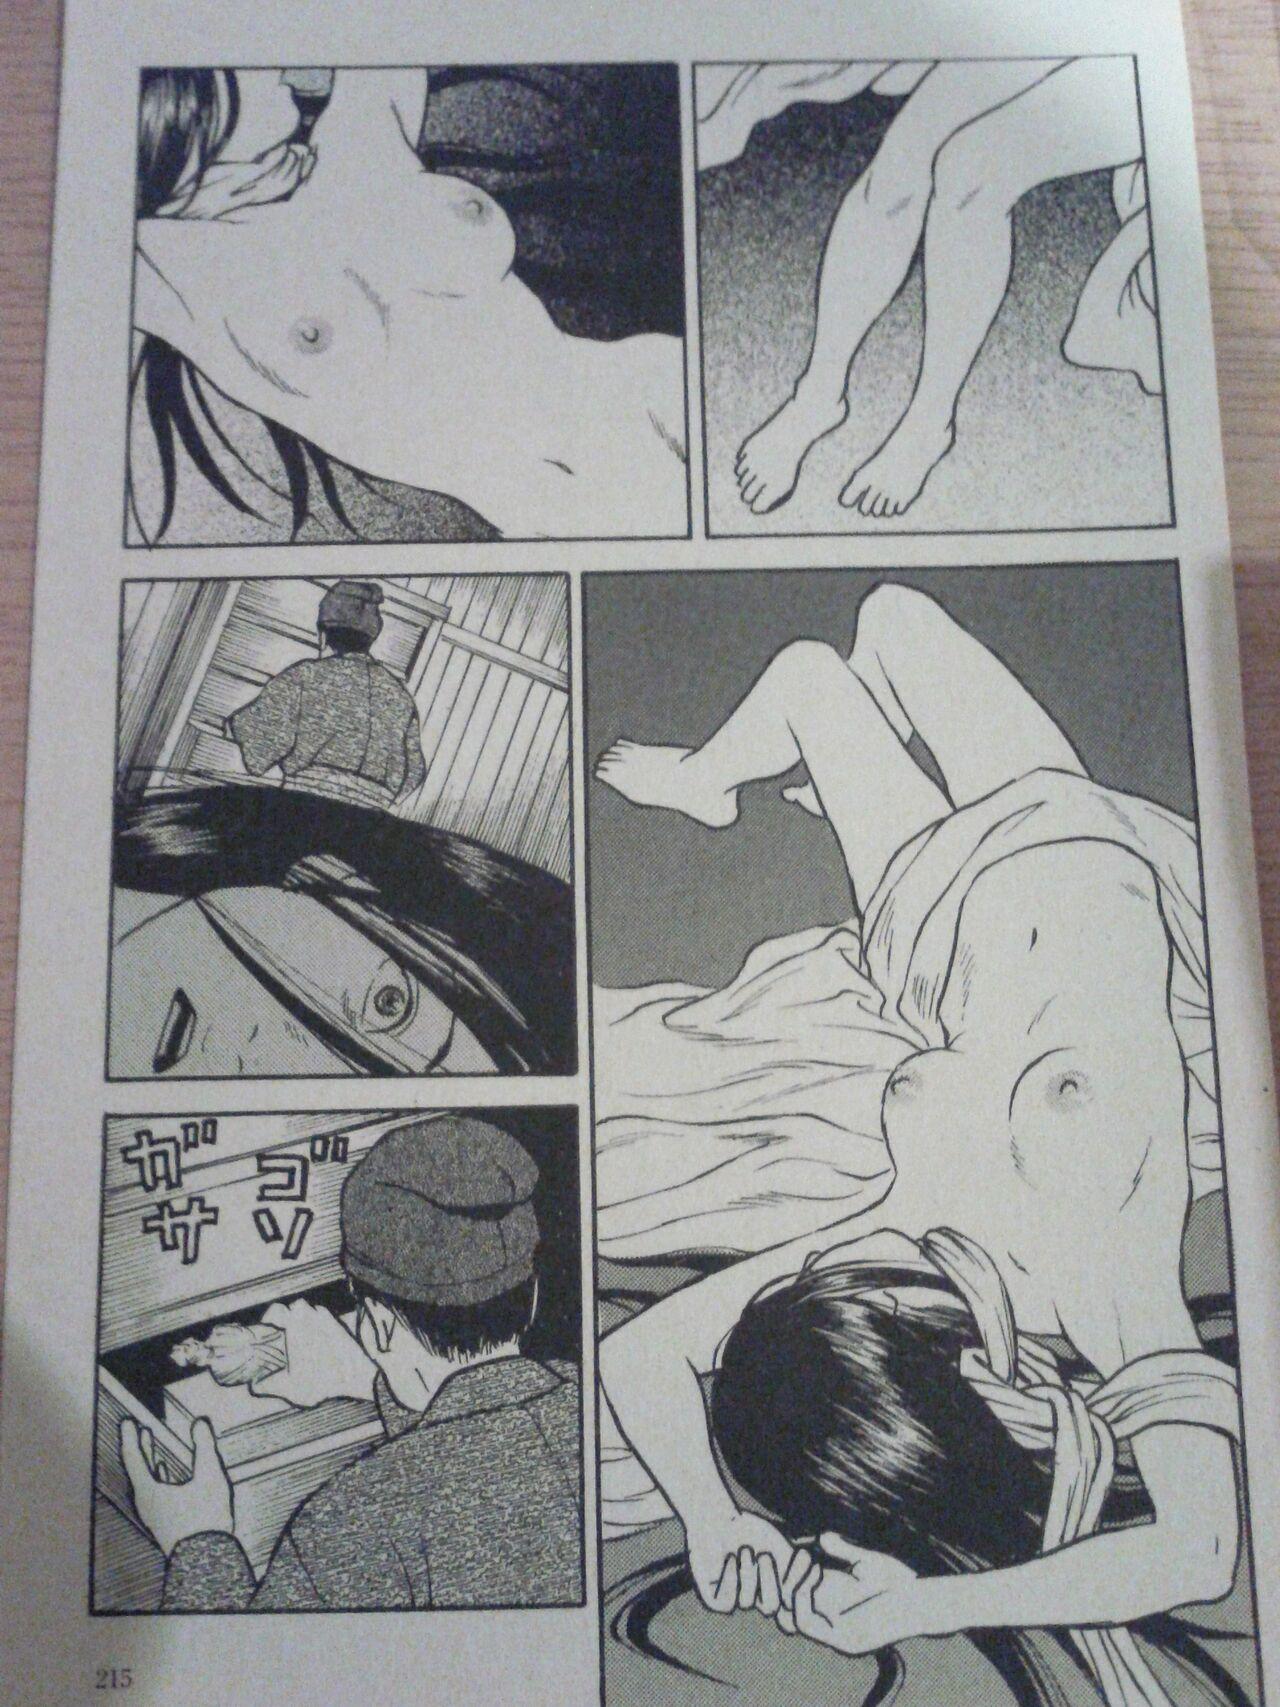 Does anyone know the source of these manga? R18-G 25